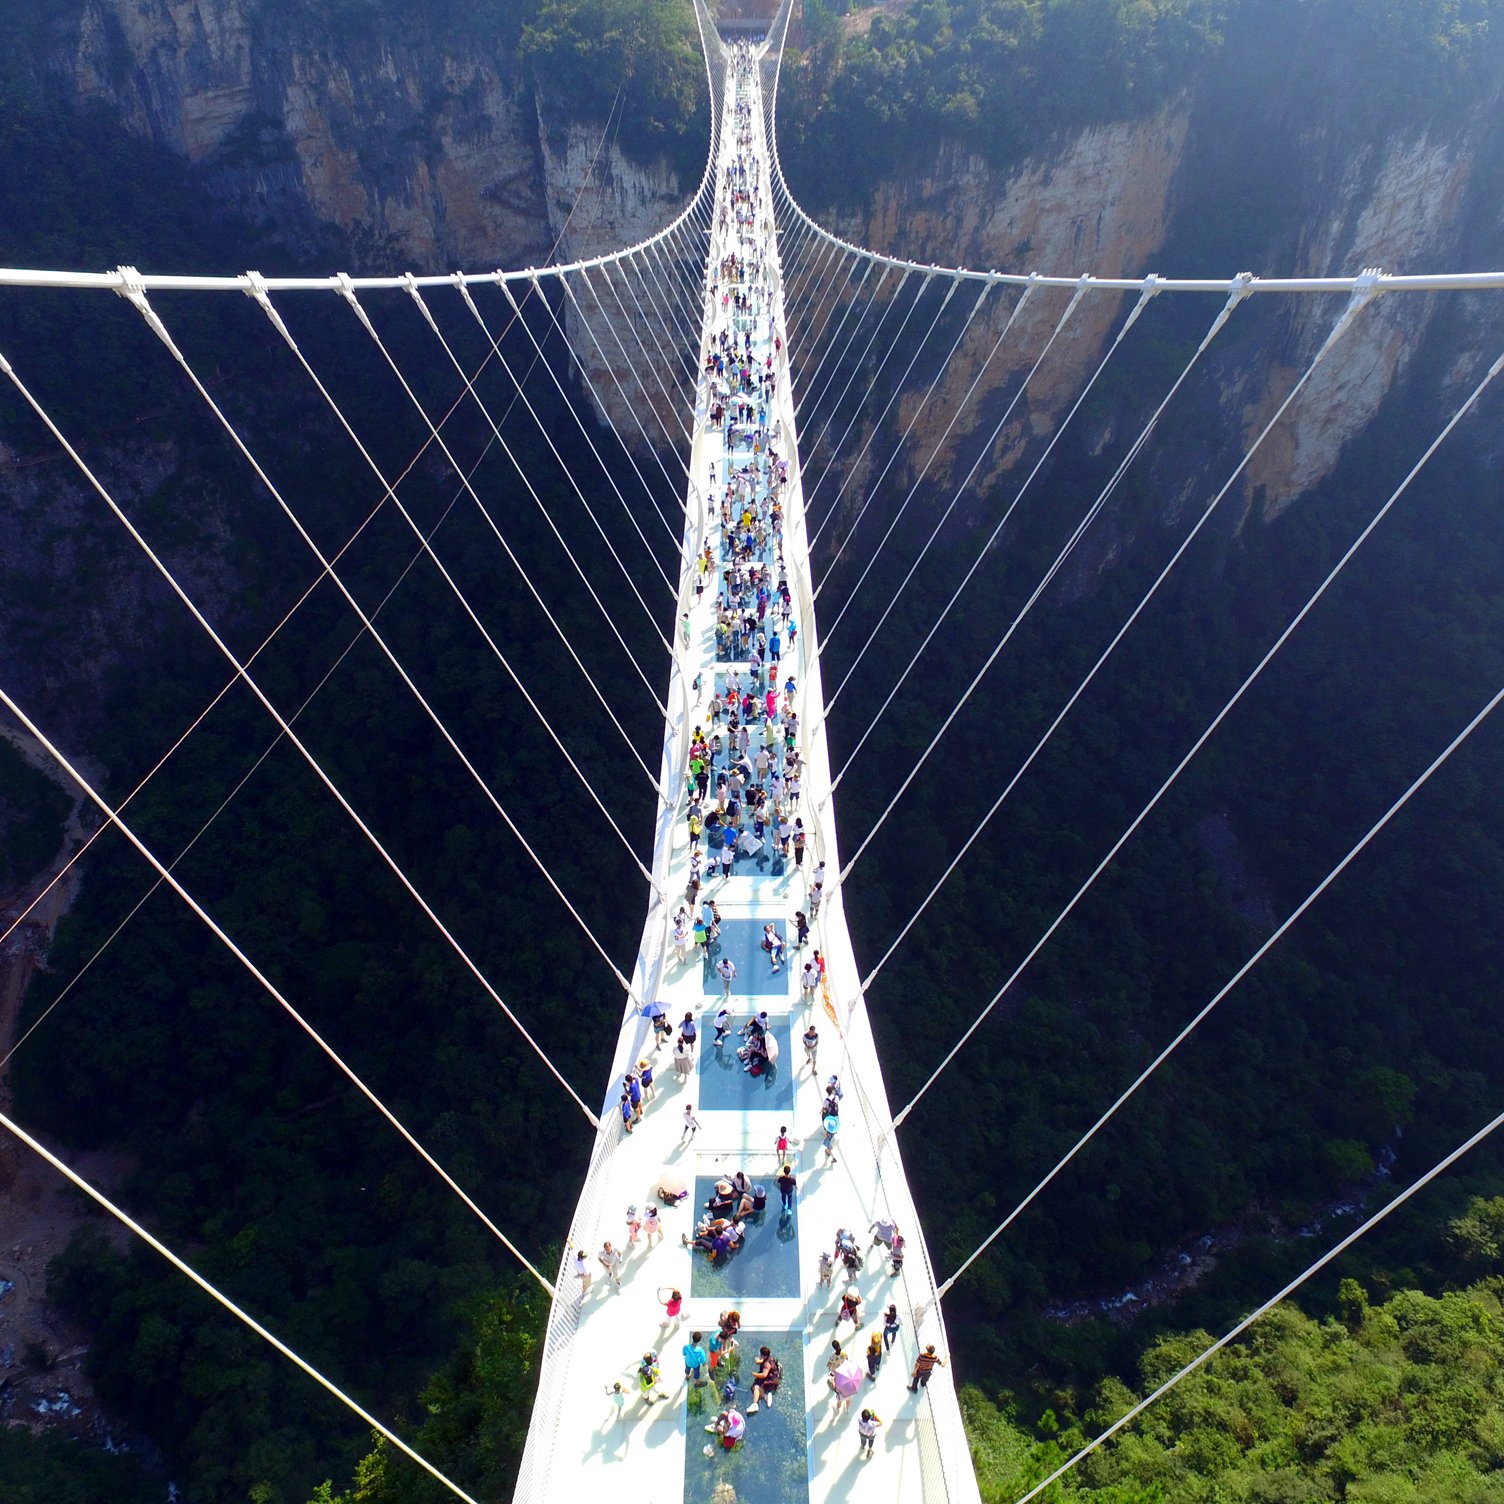 The longest and highest glass bridge in the world was opened